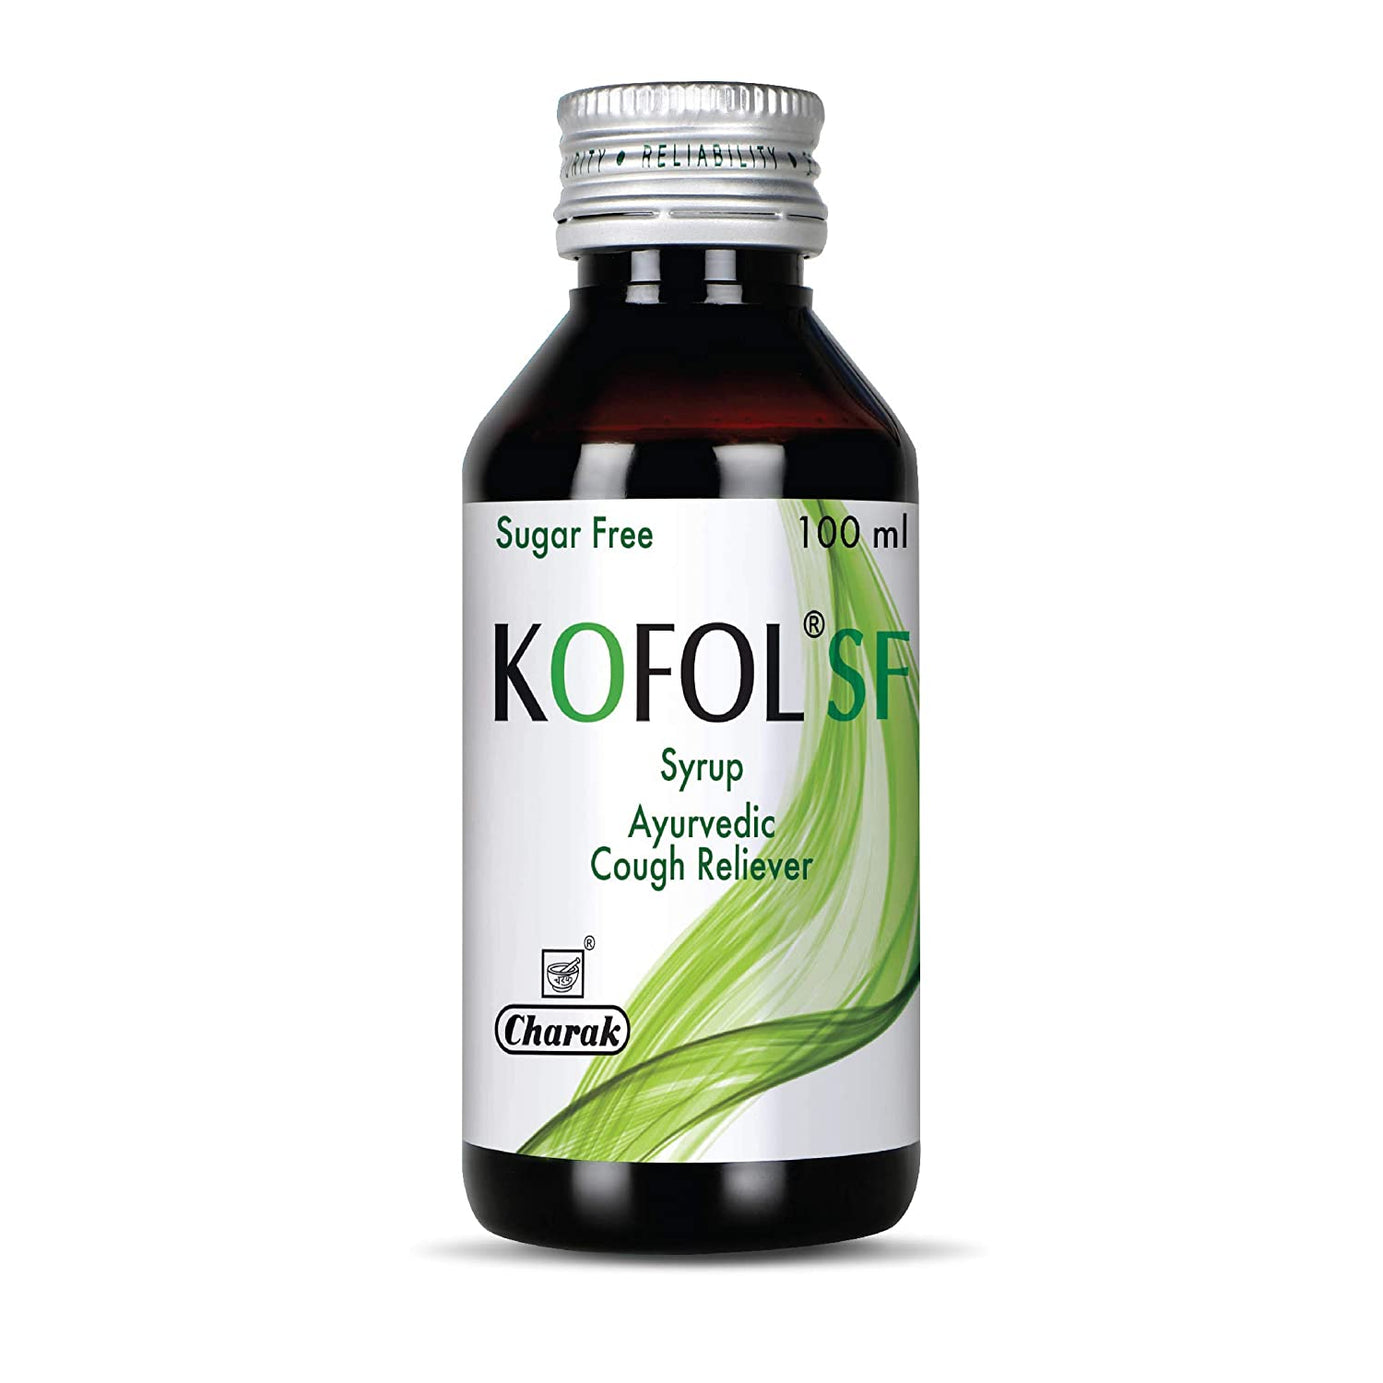 Shop Kofol SF Syrup 100ml at price 87.00 from Charak Online - Ayush Care